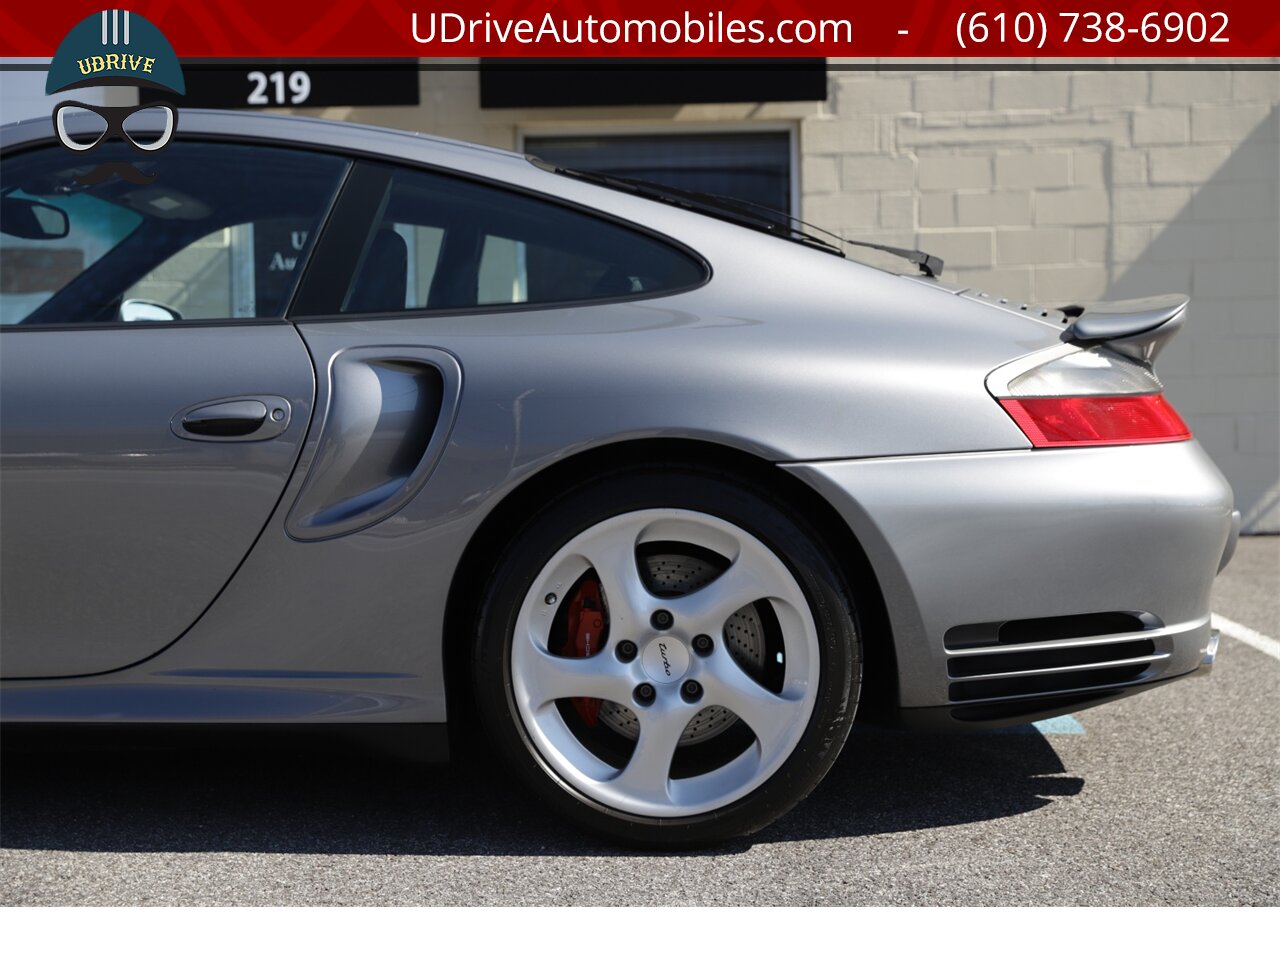 2003 Porsche 911 996 Turbo X50 Power Kit 6 Speed Seal Grey  over Black Leather - Photo 24 - West Chester, PA 19382